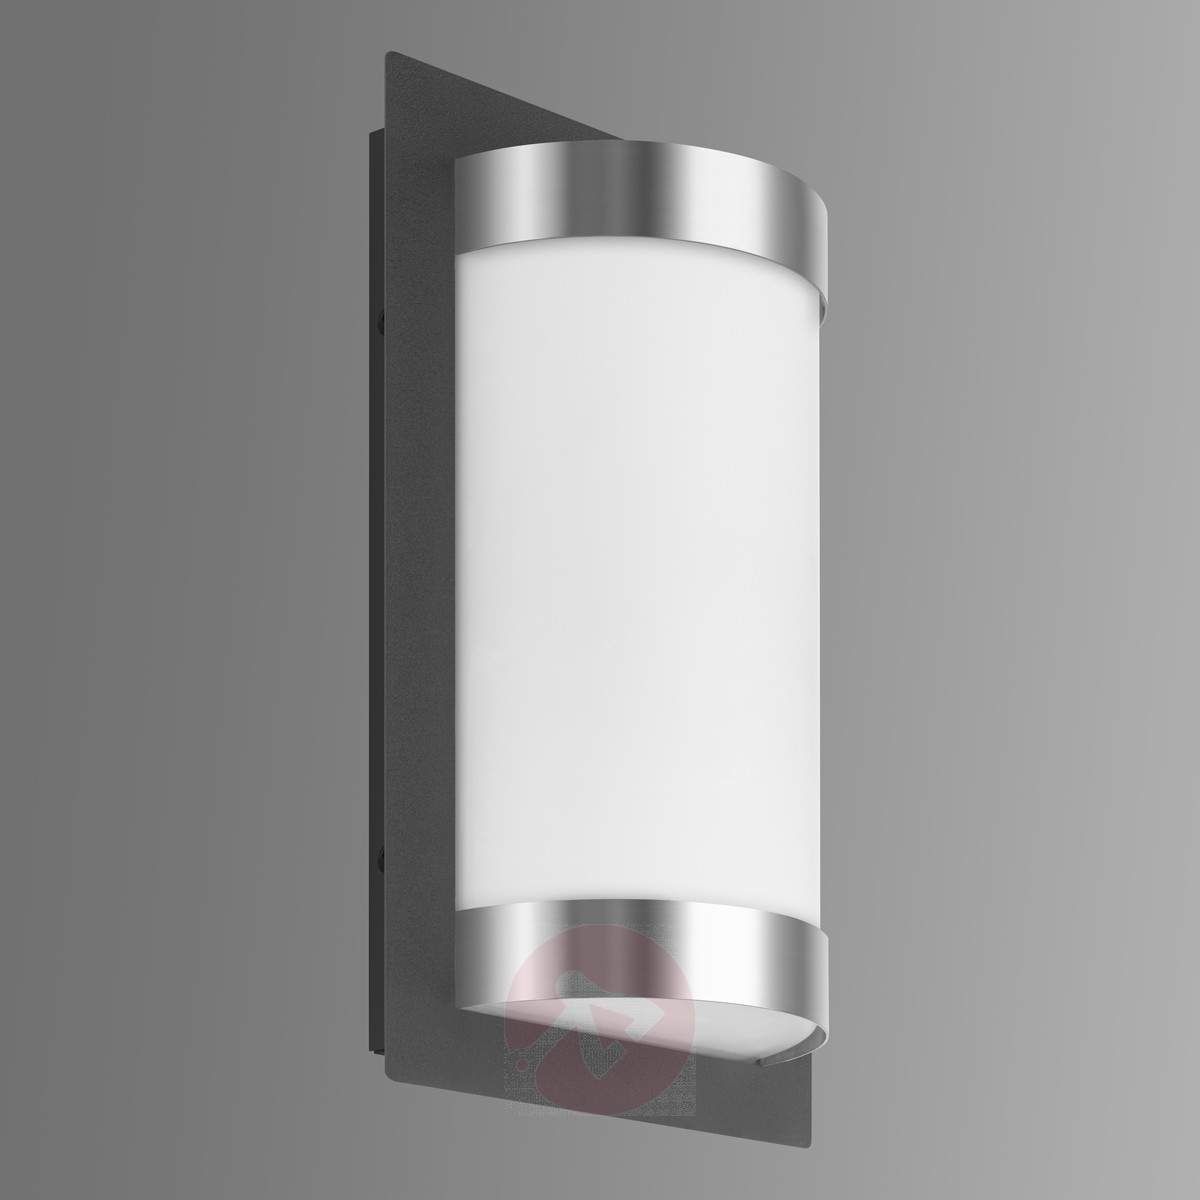 High Quality Apollo Outdoor Wall Light | Lights.co (View 4 of 15)